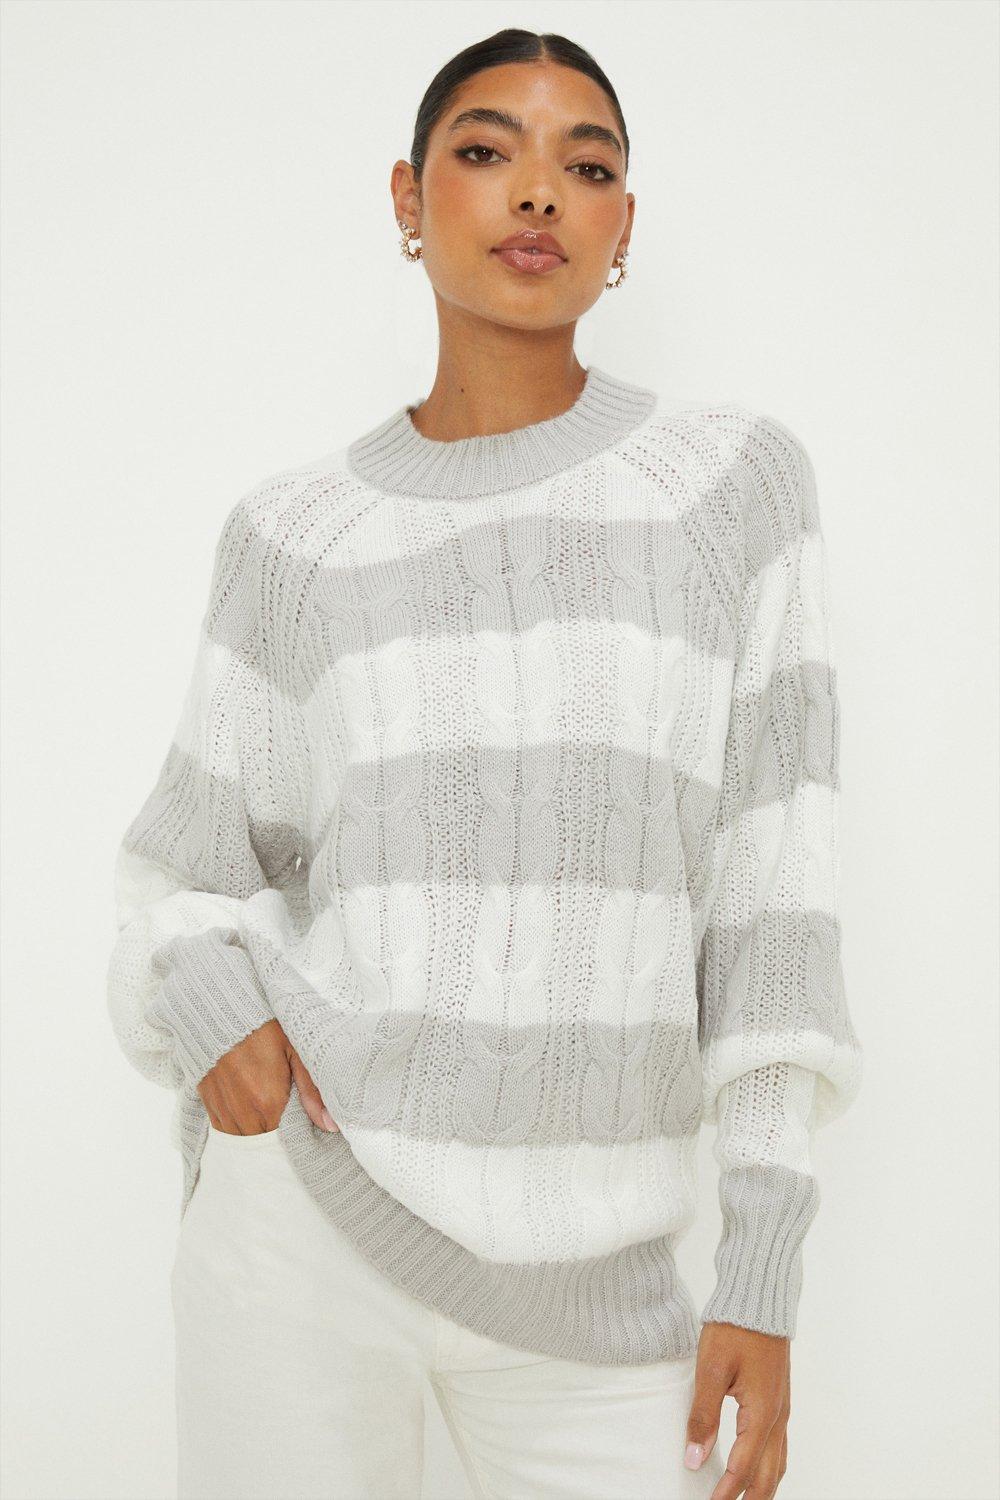 Women’s Stripe Cable High Neck Tunic Jumper - grey - S